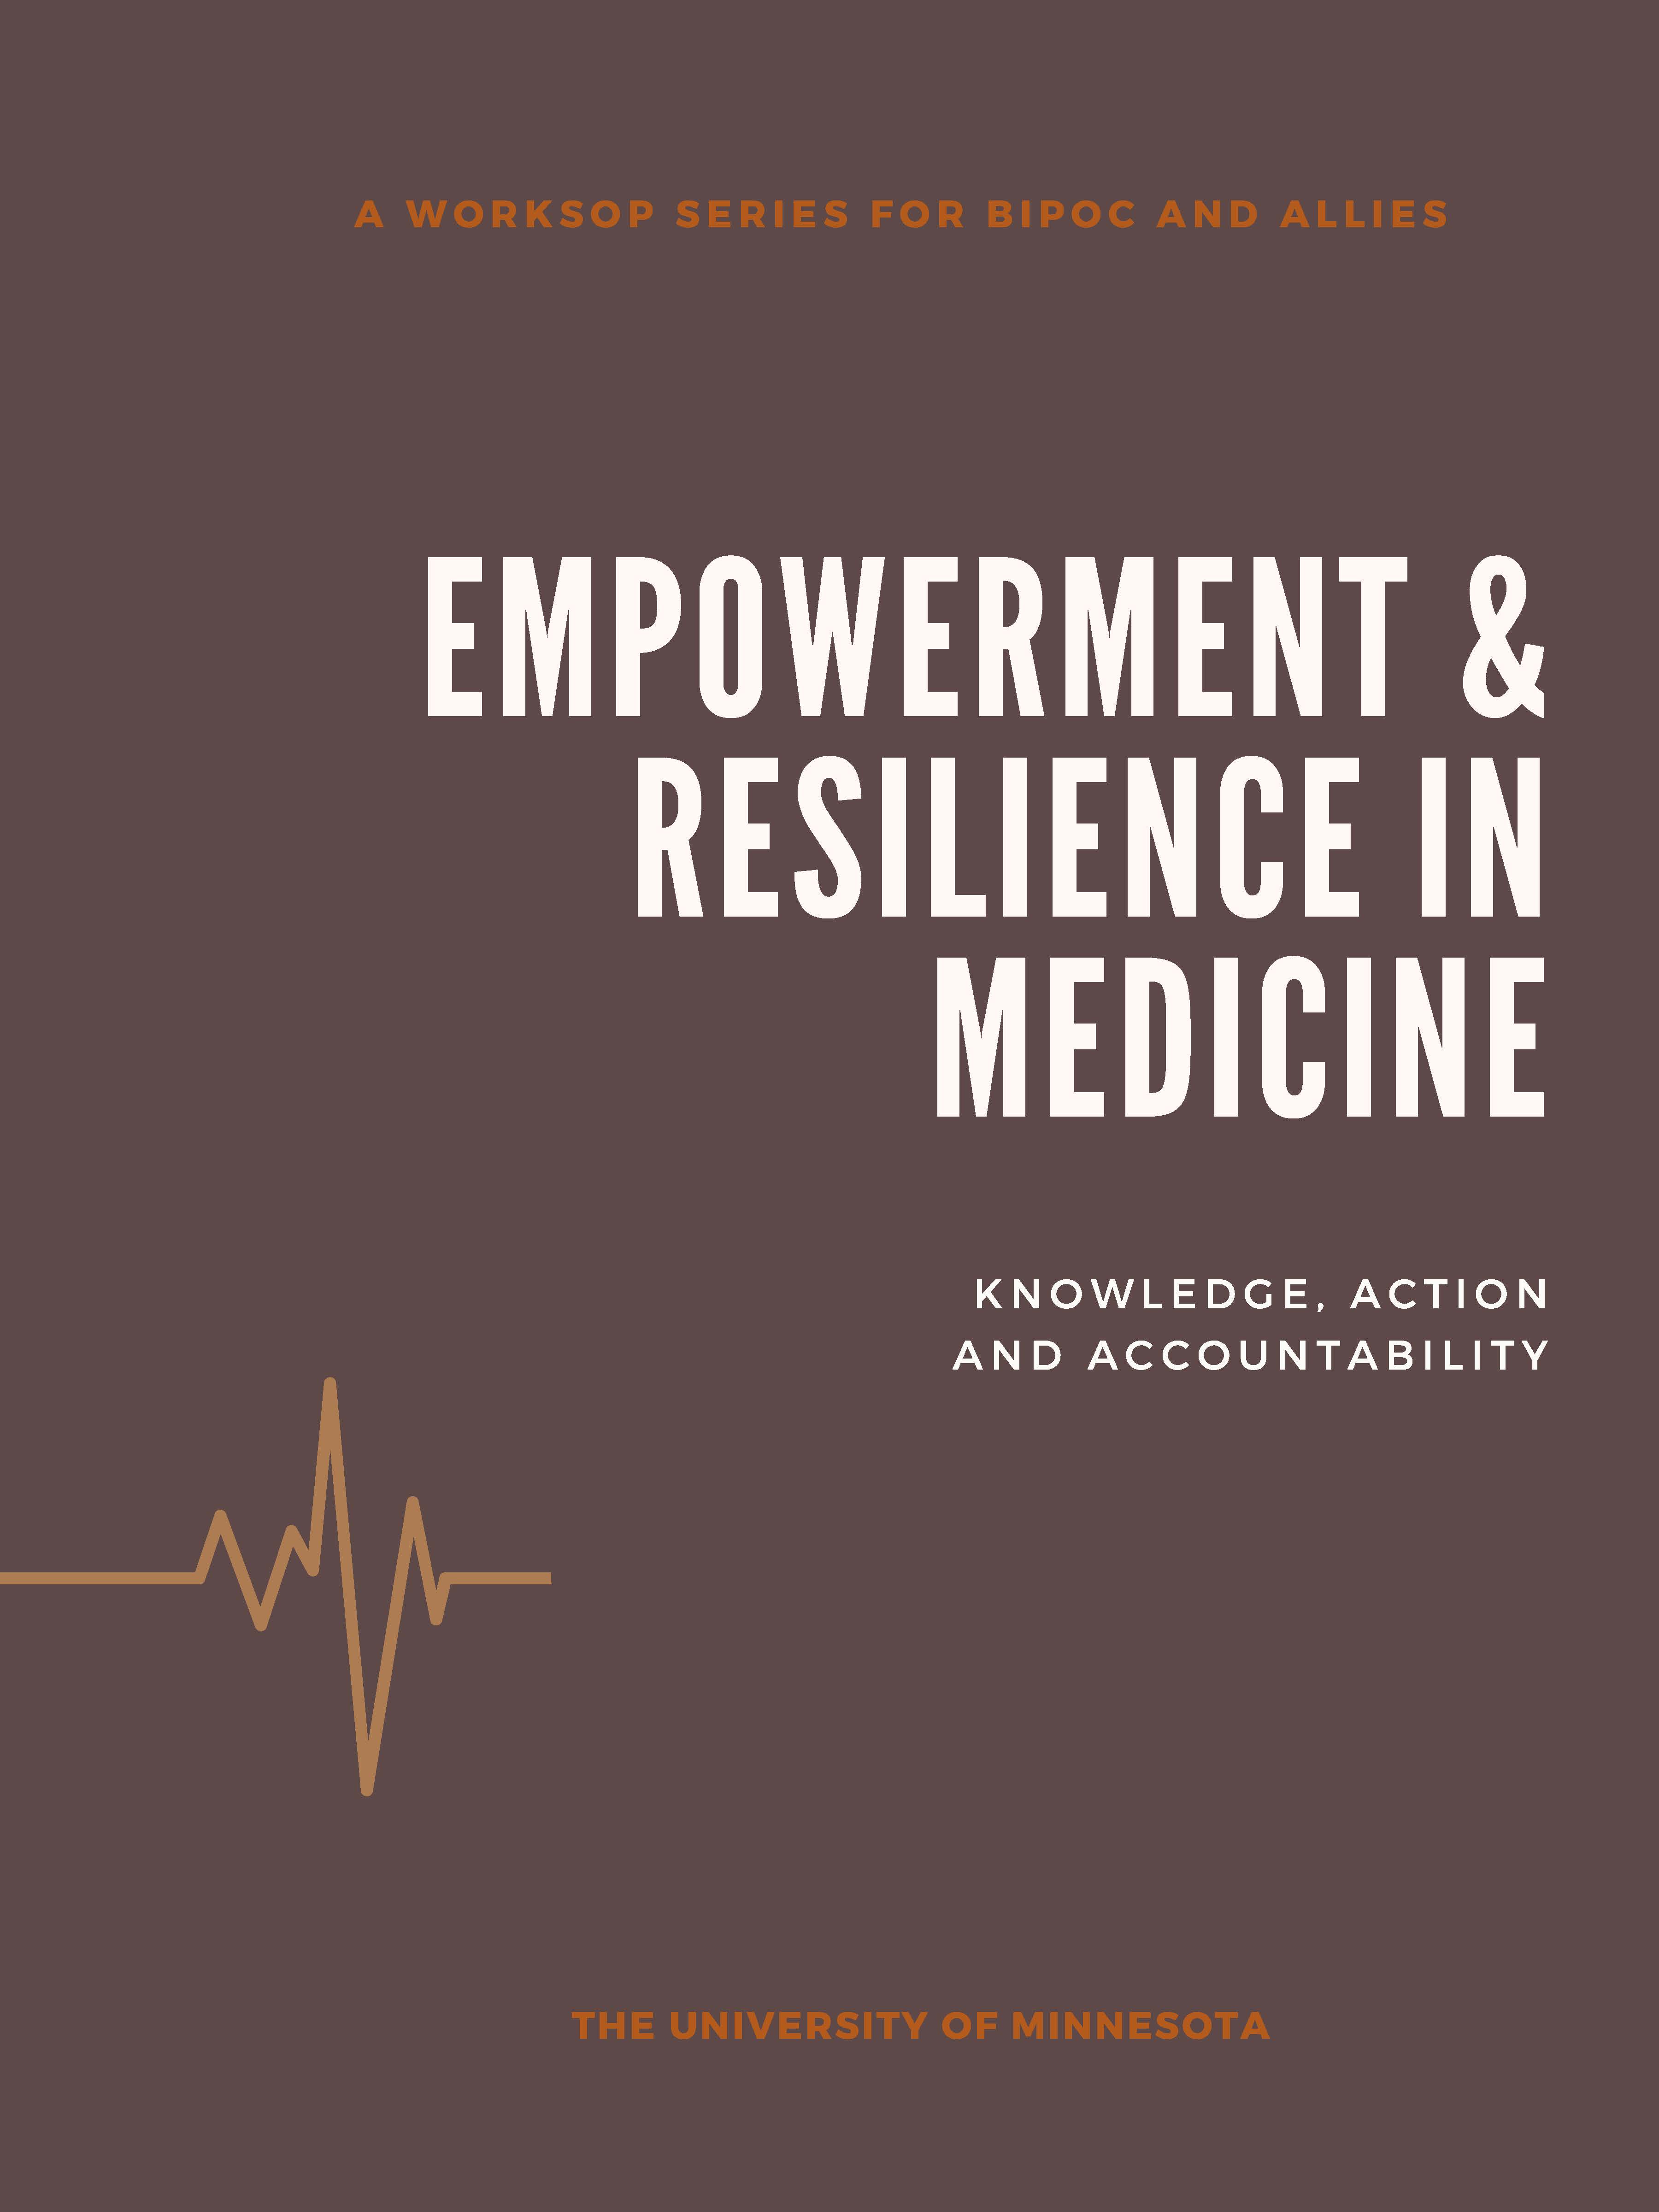 EMPOWERMENT & RESILIENCE IN MEDICINE A WORKSOP SERIES FOR BIPOC AND ALLIES